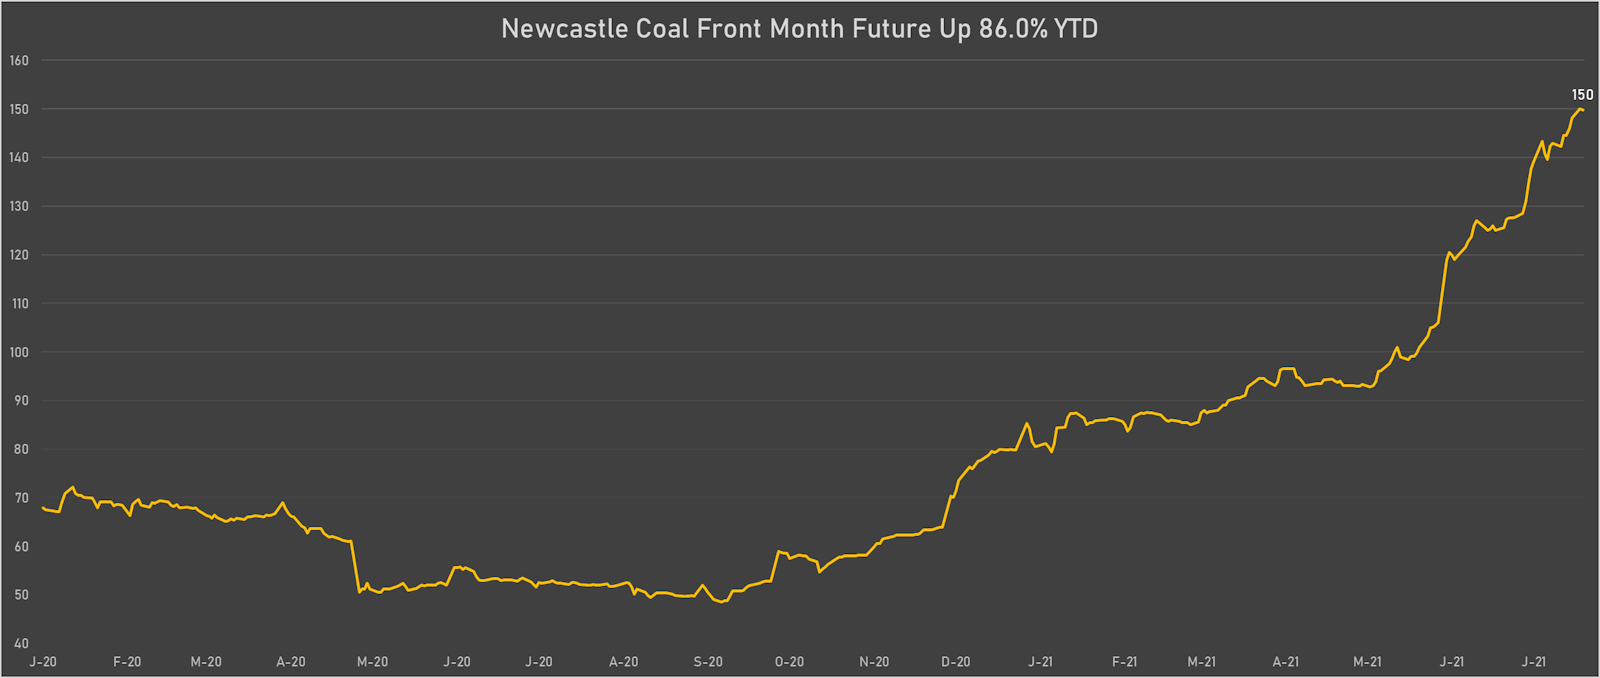 Newcastle Coal Front Month Future Prices Are Up 86% YTD | Sources: ϕpost, Refinitiv data